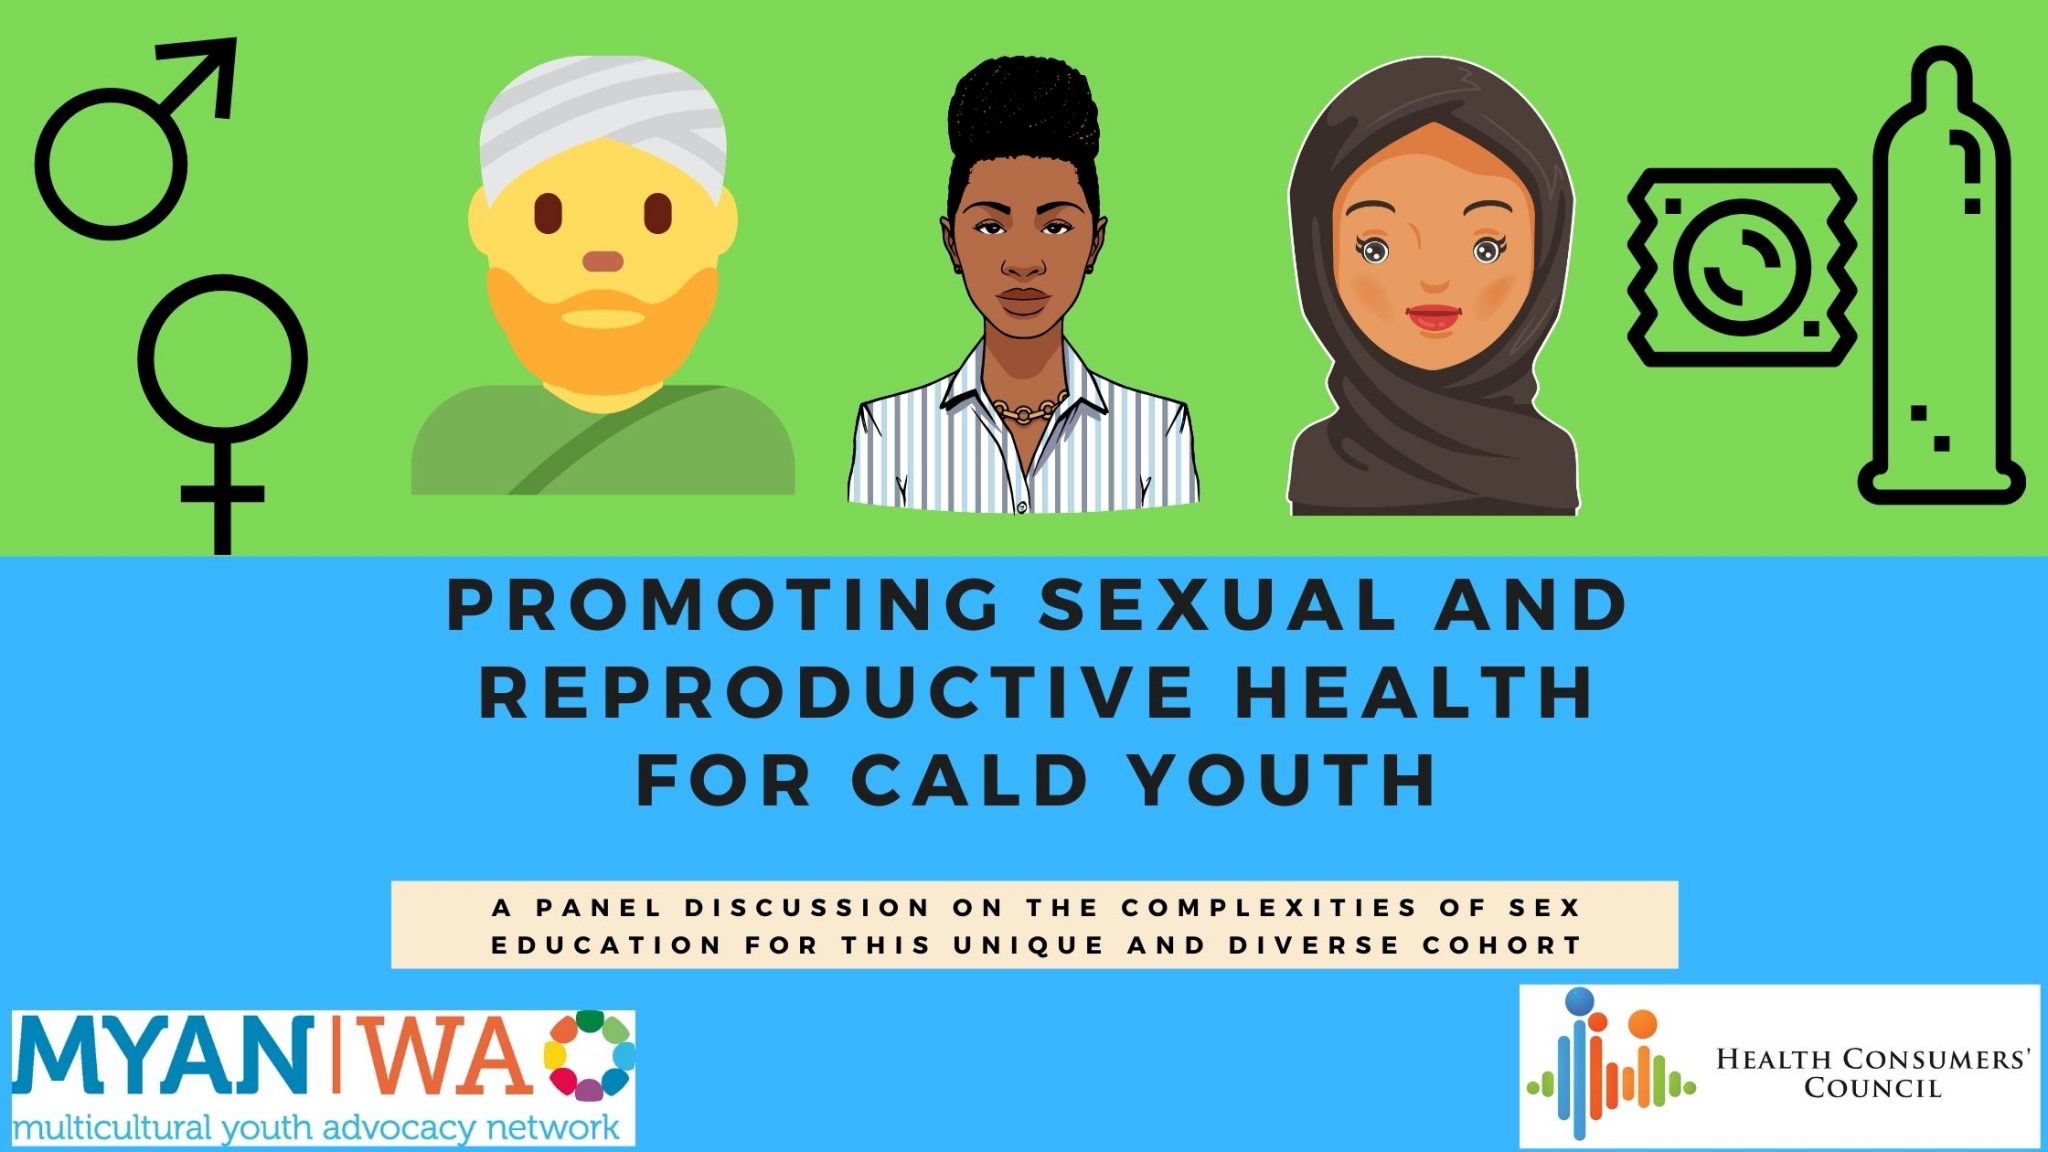 Promoting Sexual And Reproductive Health For Cald Youth Health Consumers Council Wa 7165